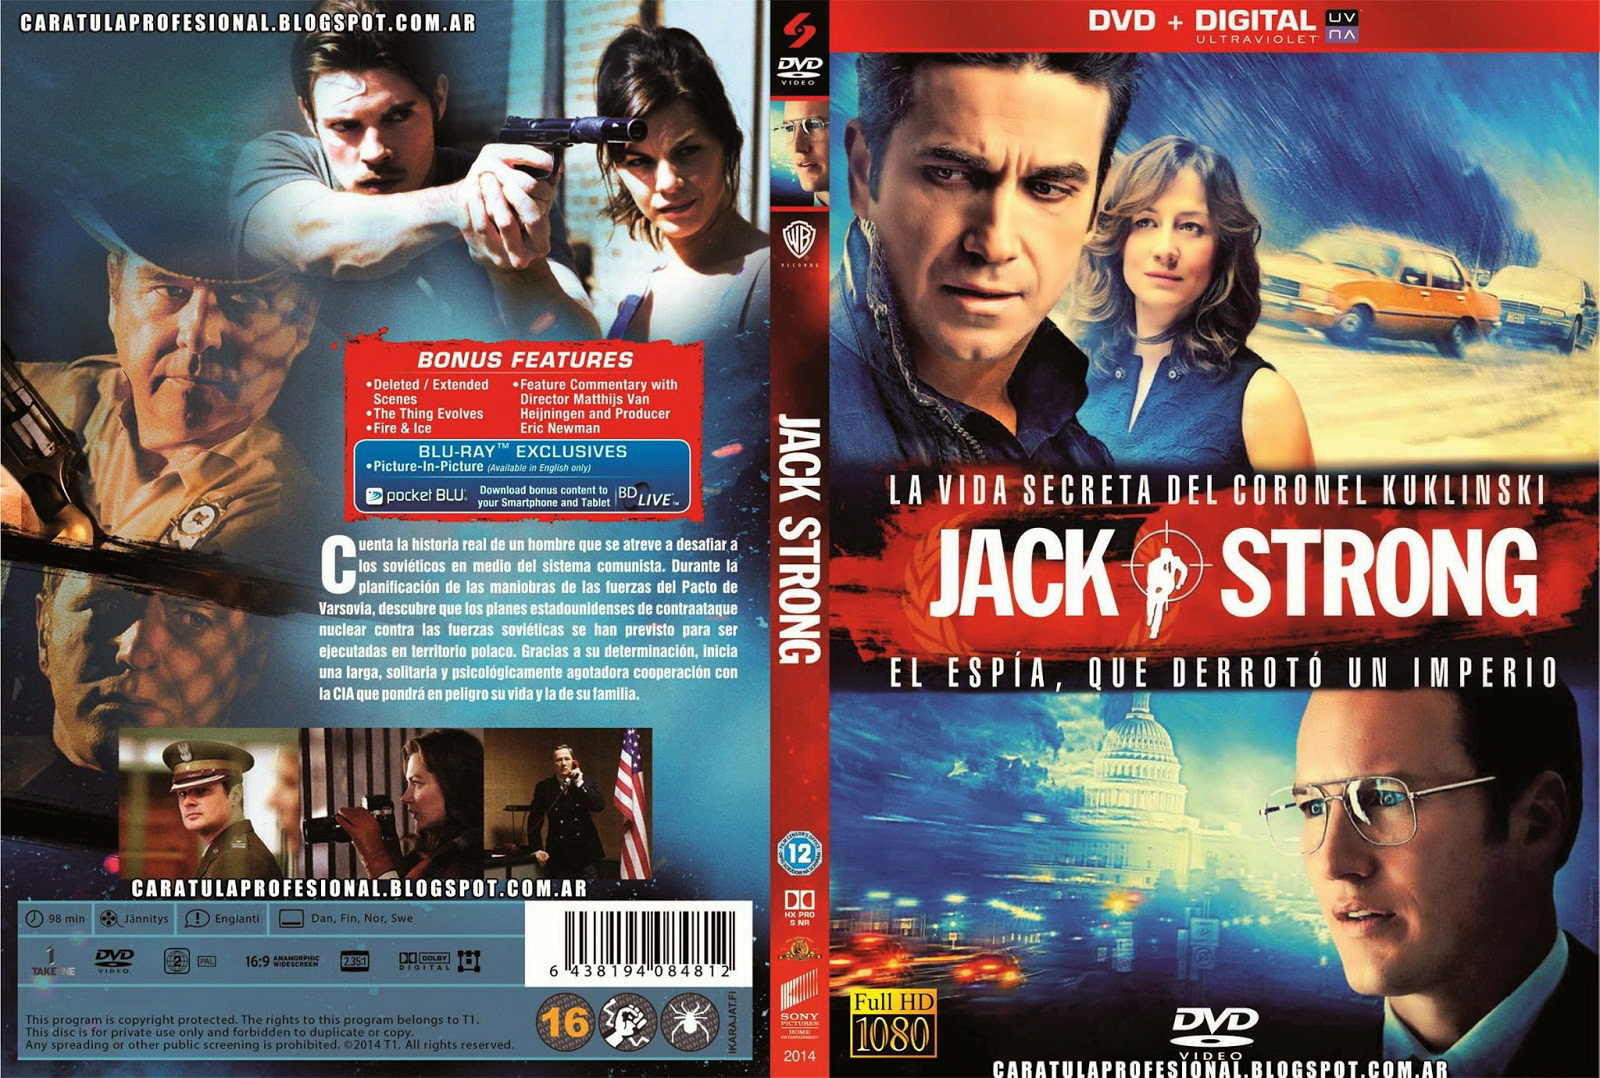 COVERS.BOX.SK ::: Blended (2014) - high quality DVD / Blueray / Movie